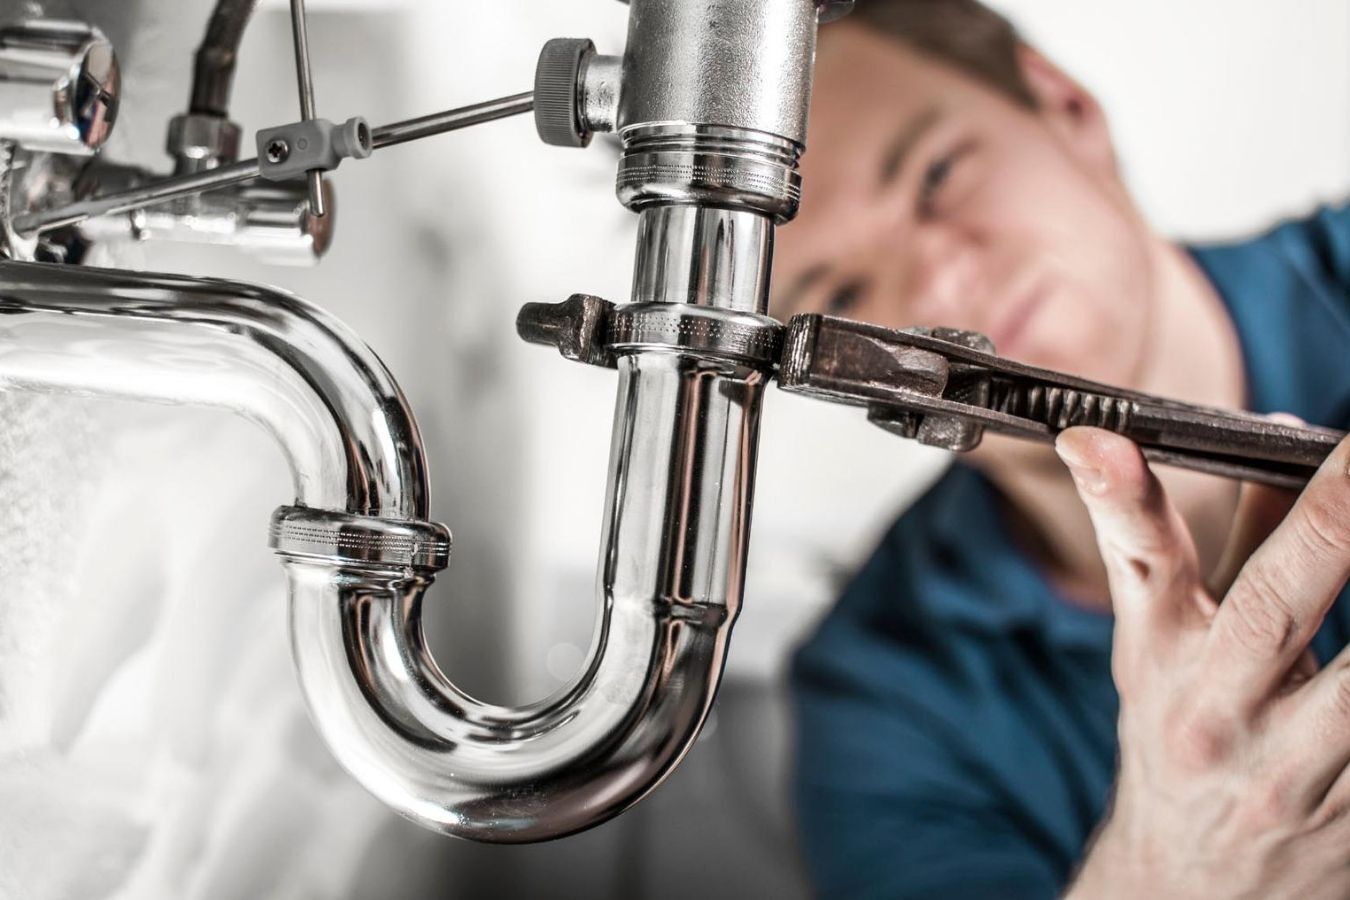 Best Plumbers Club is a plumbing resource with a national network of plumbers from various cities and states in the United States.